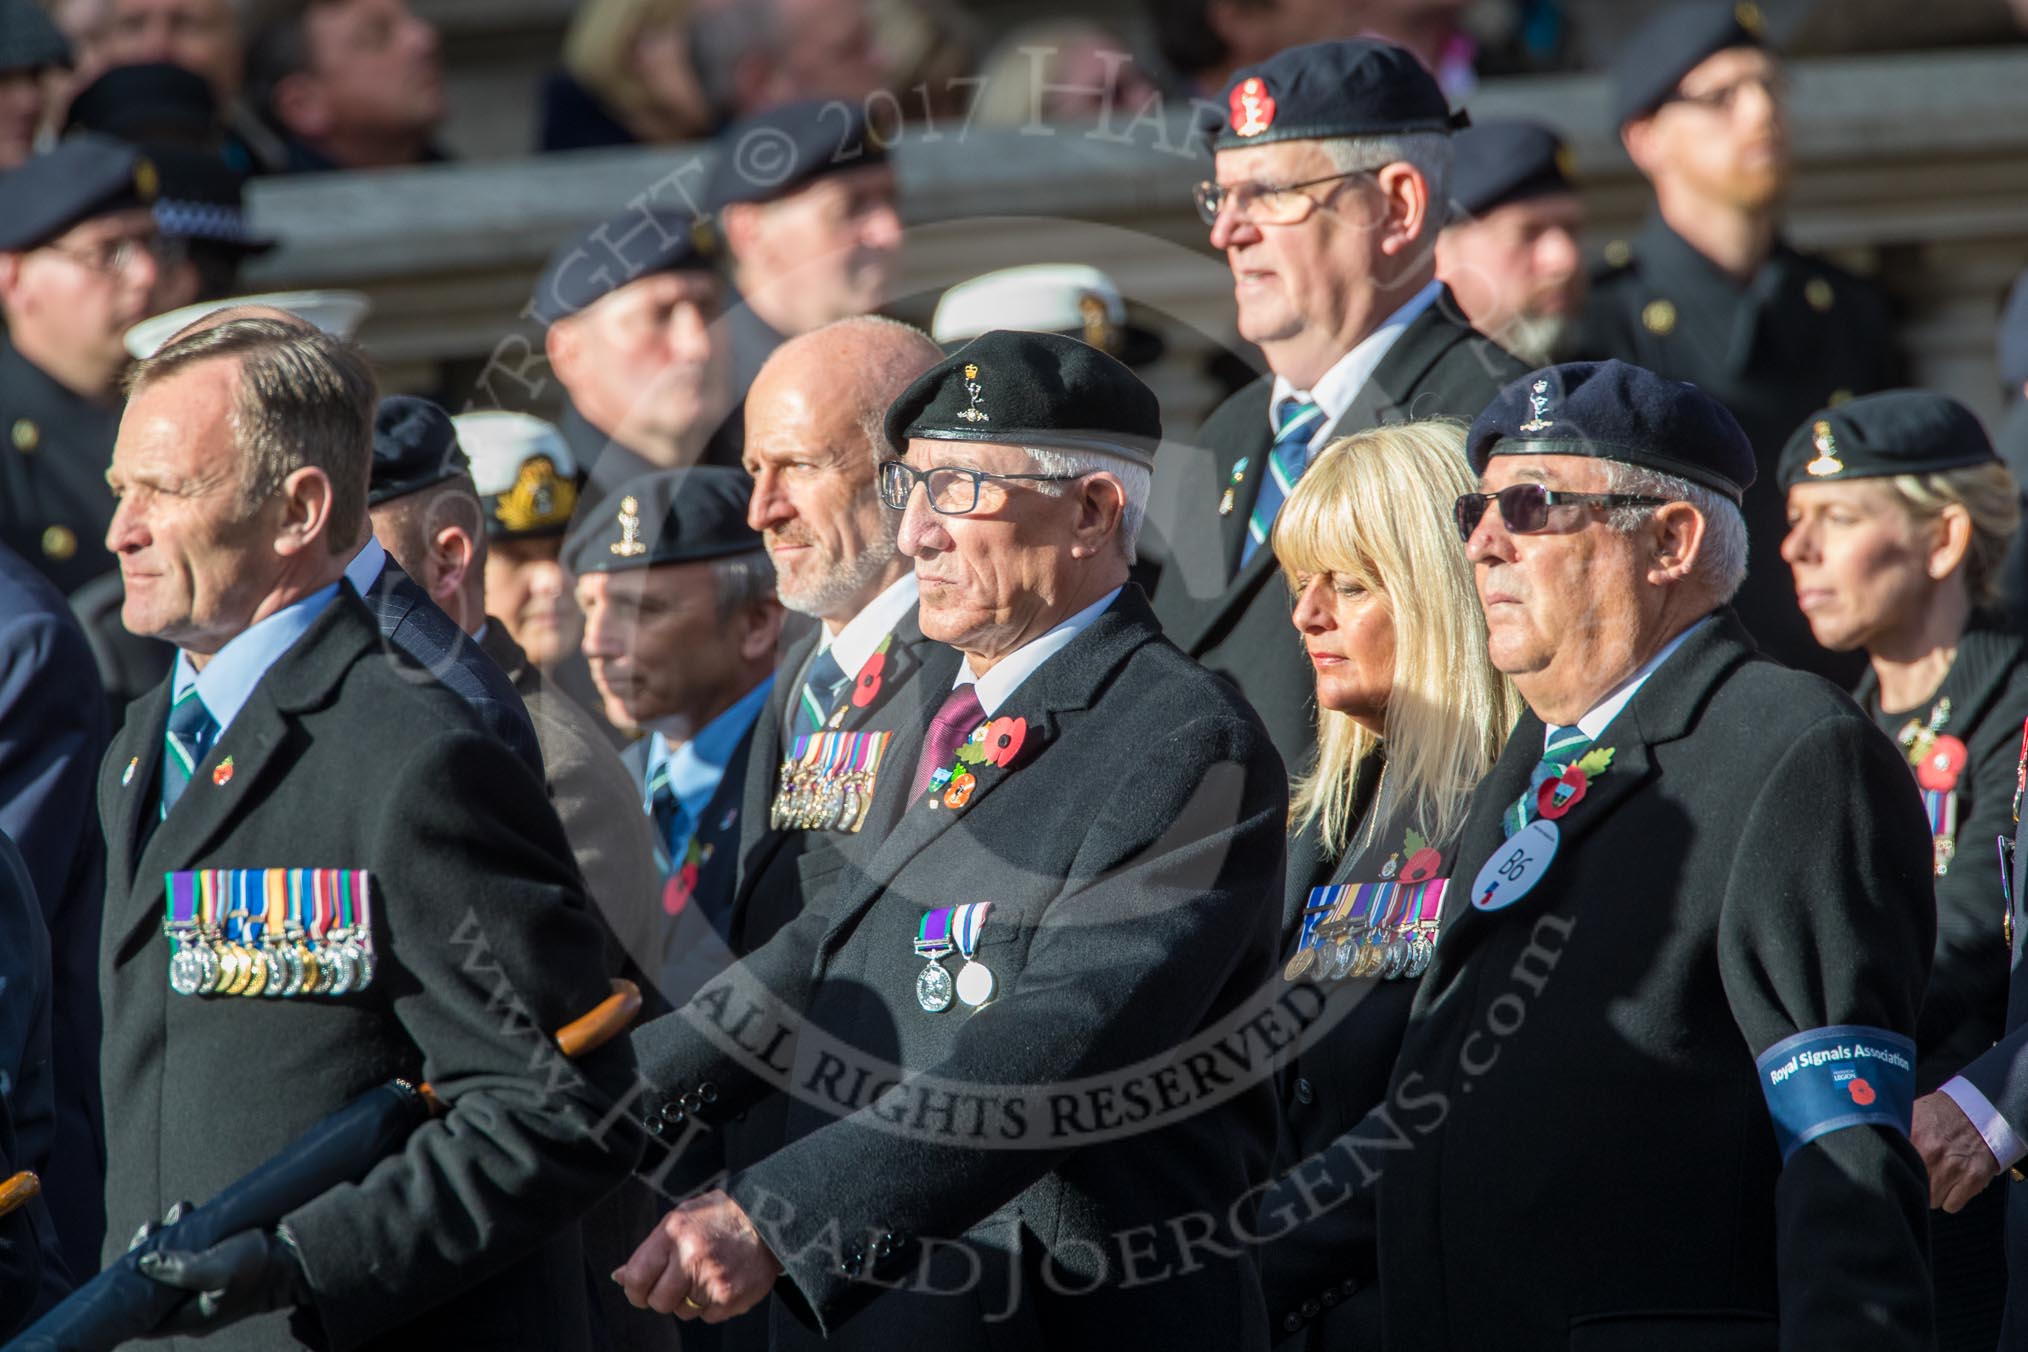 Royal Signals Association (Group B6, 49 members) during the Royal British Legion March Past on Remembrance Sunday at the Cenotaph, Whitehall, Westminster, London, 11 November 2018, 12:06.